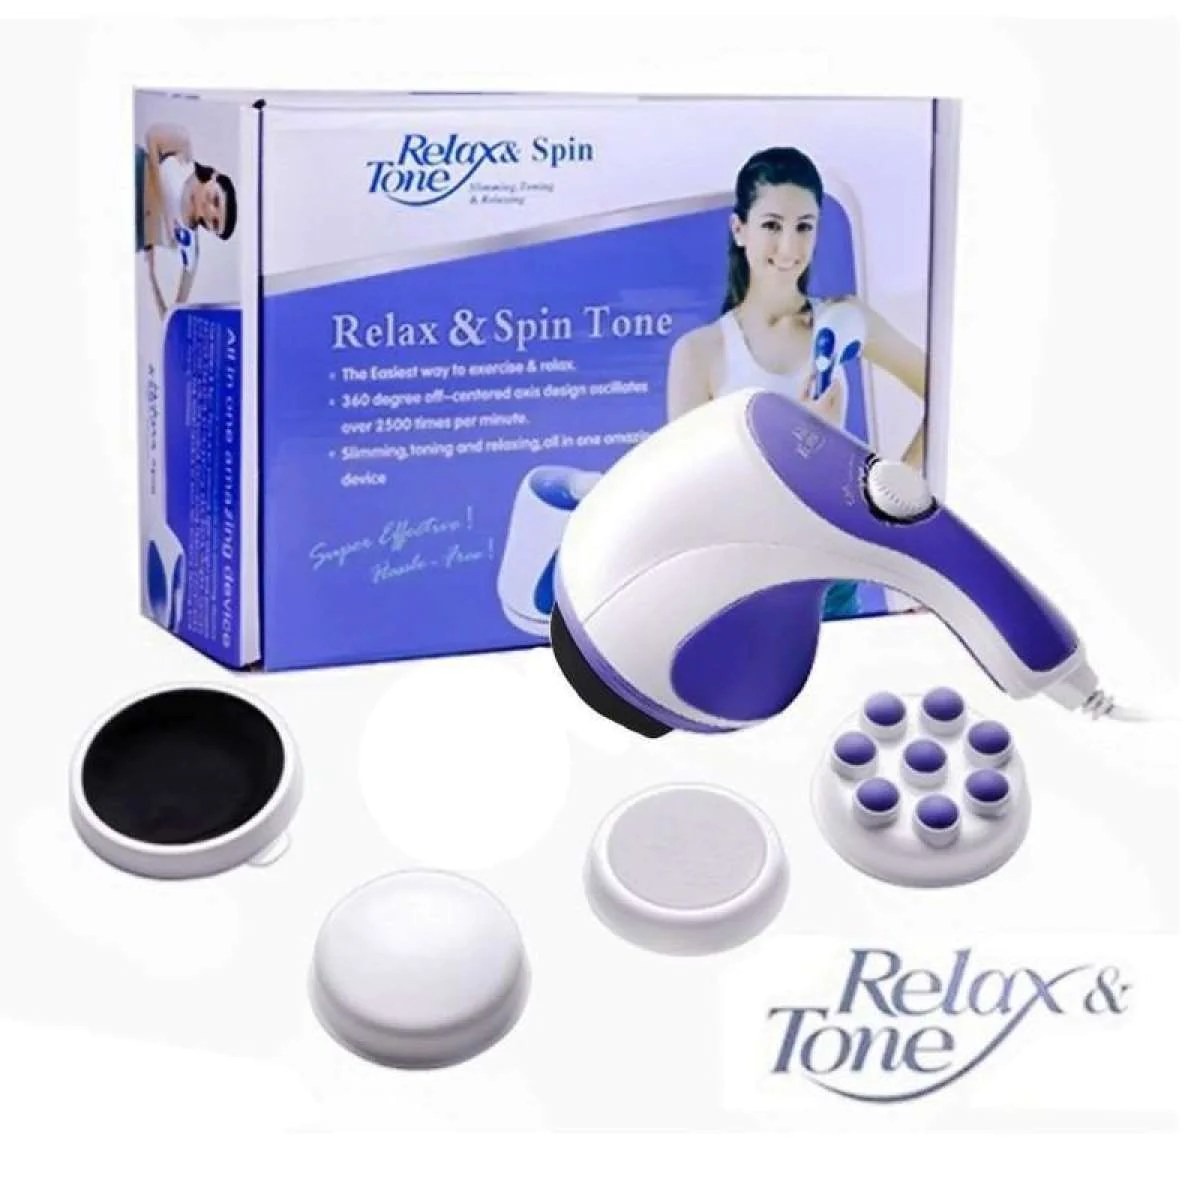 RELAX-&-SPIN-TONE-SLIMMING-TONING-&-RELAXING-BODY-MASSAGER